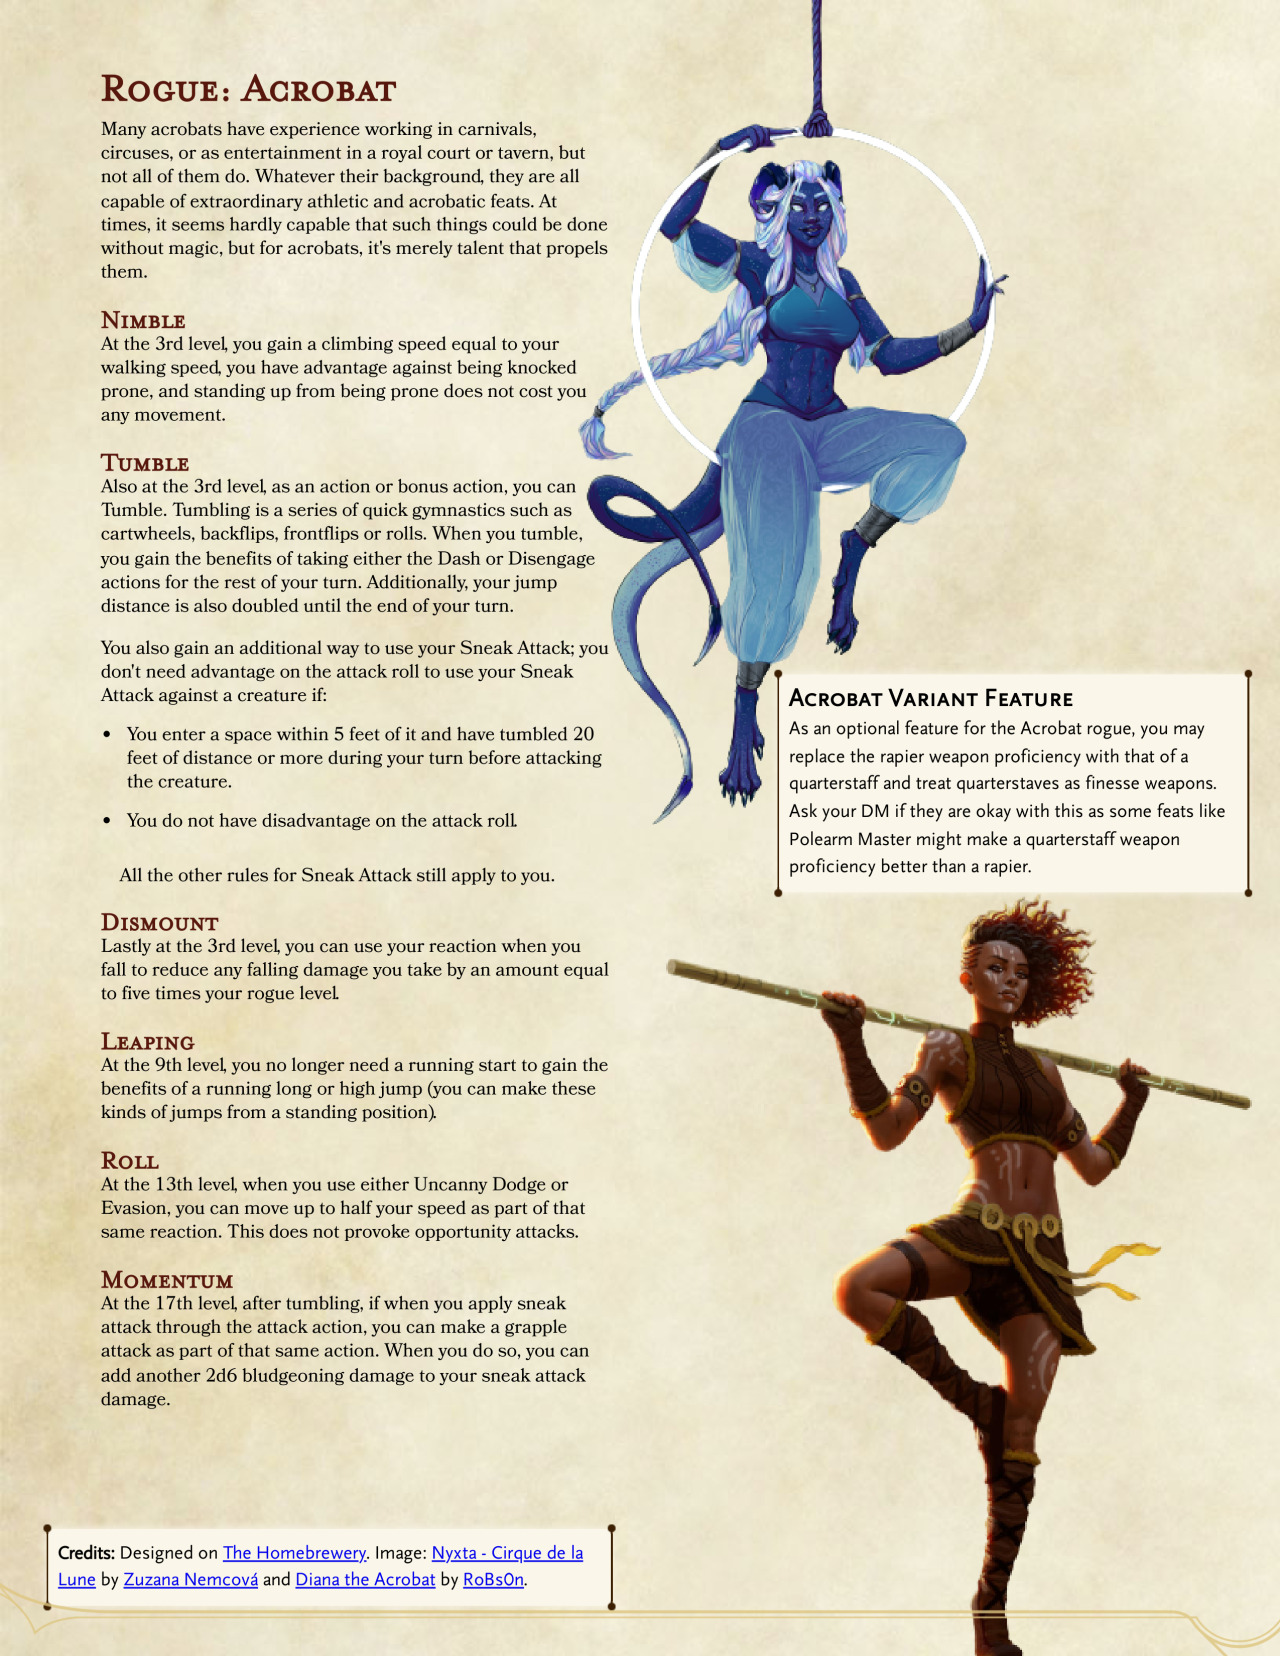 DnD Rogue class guide - how to play these artful tricksters